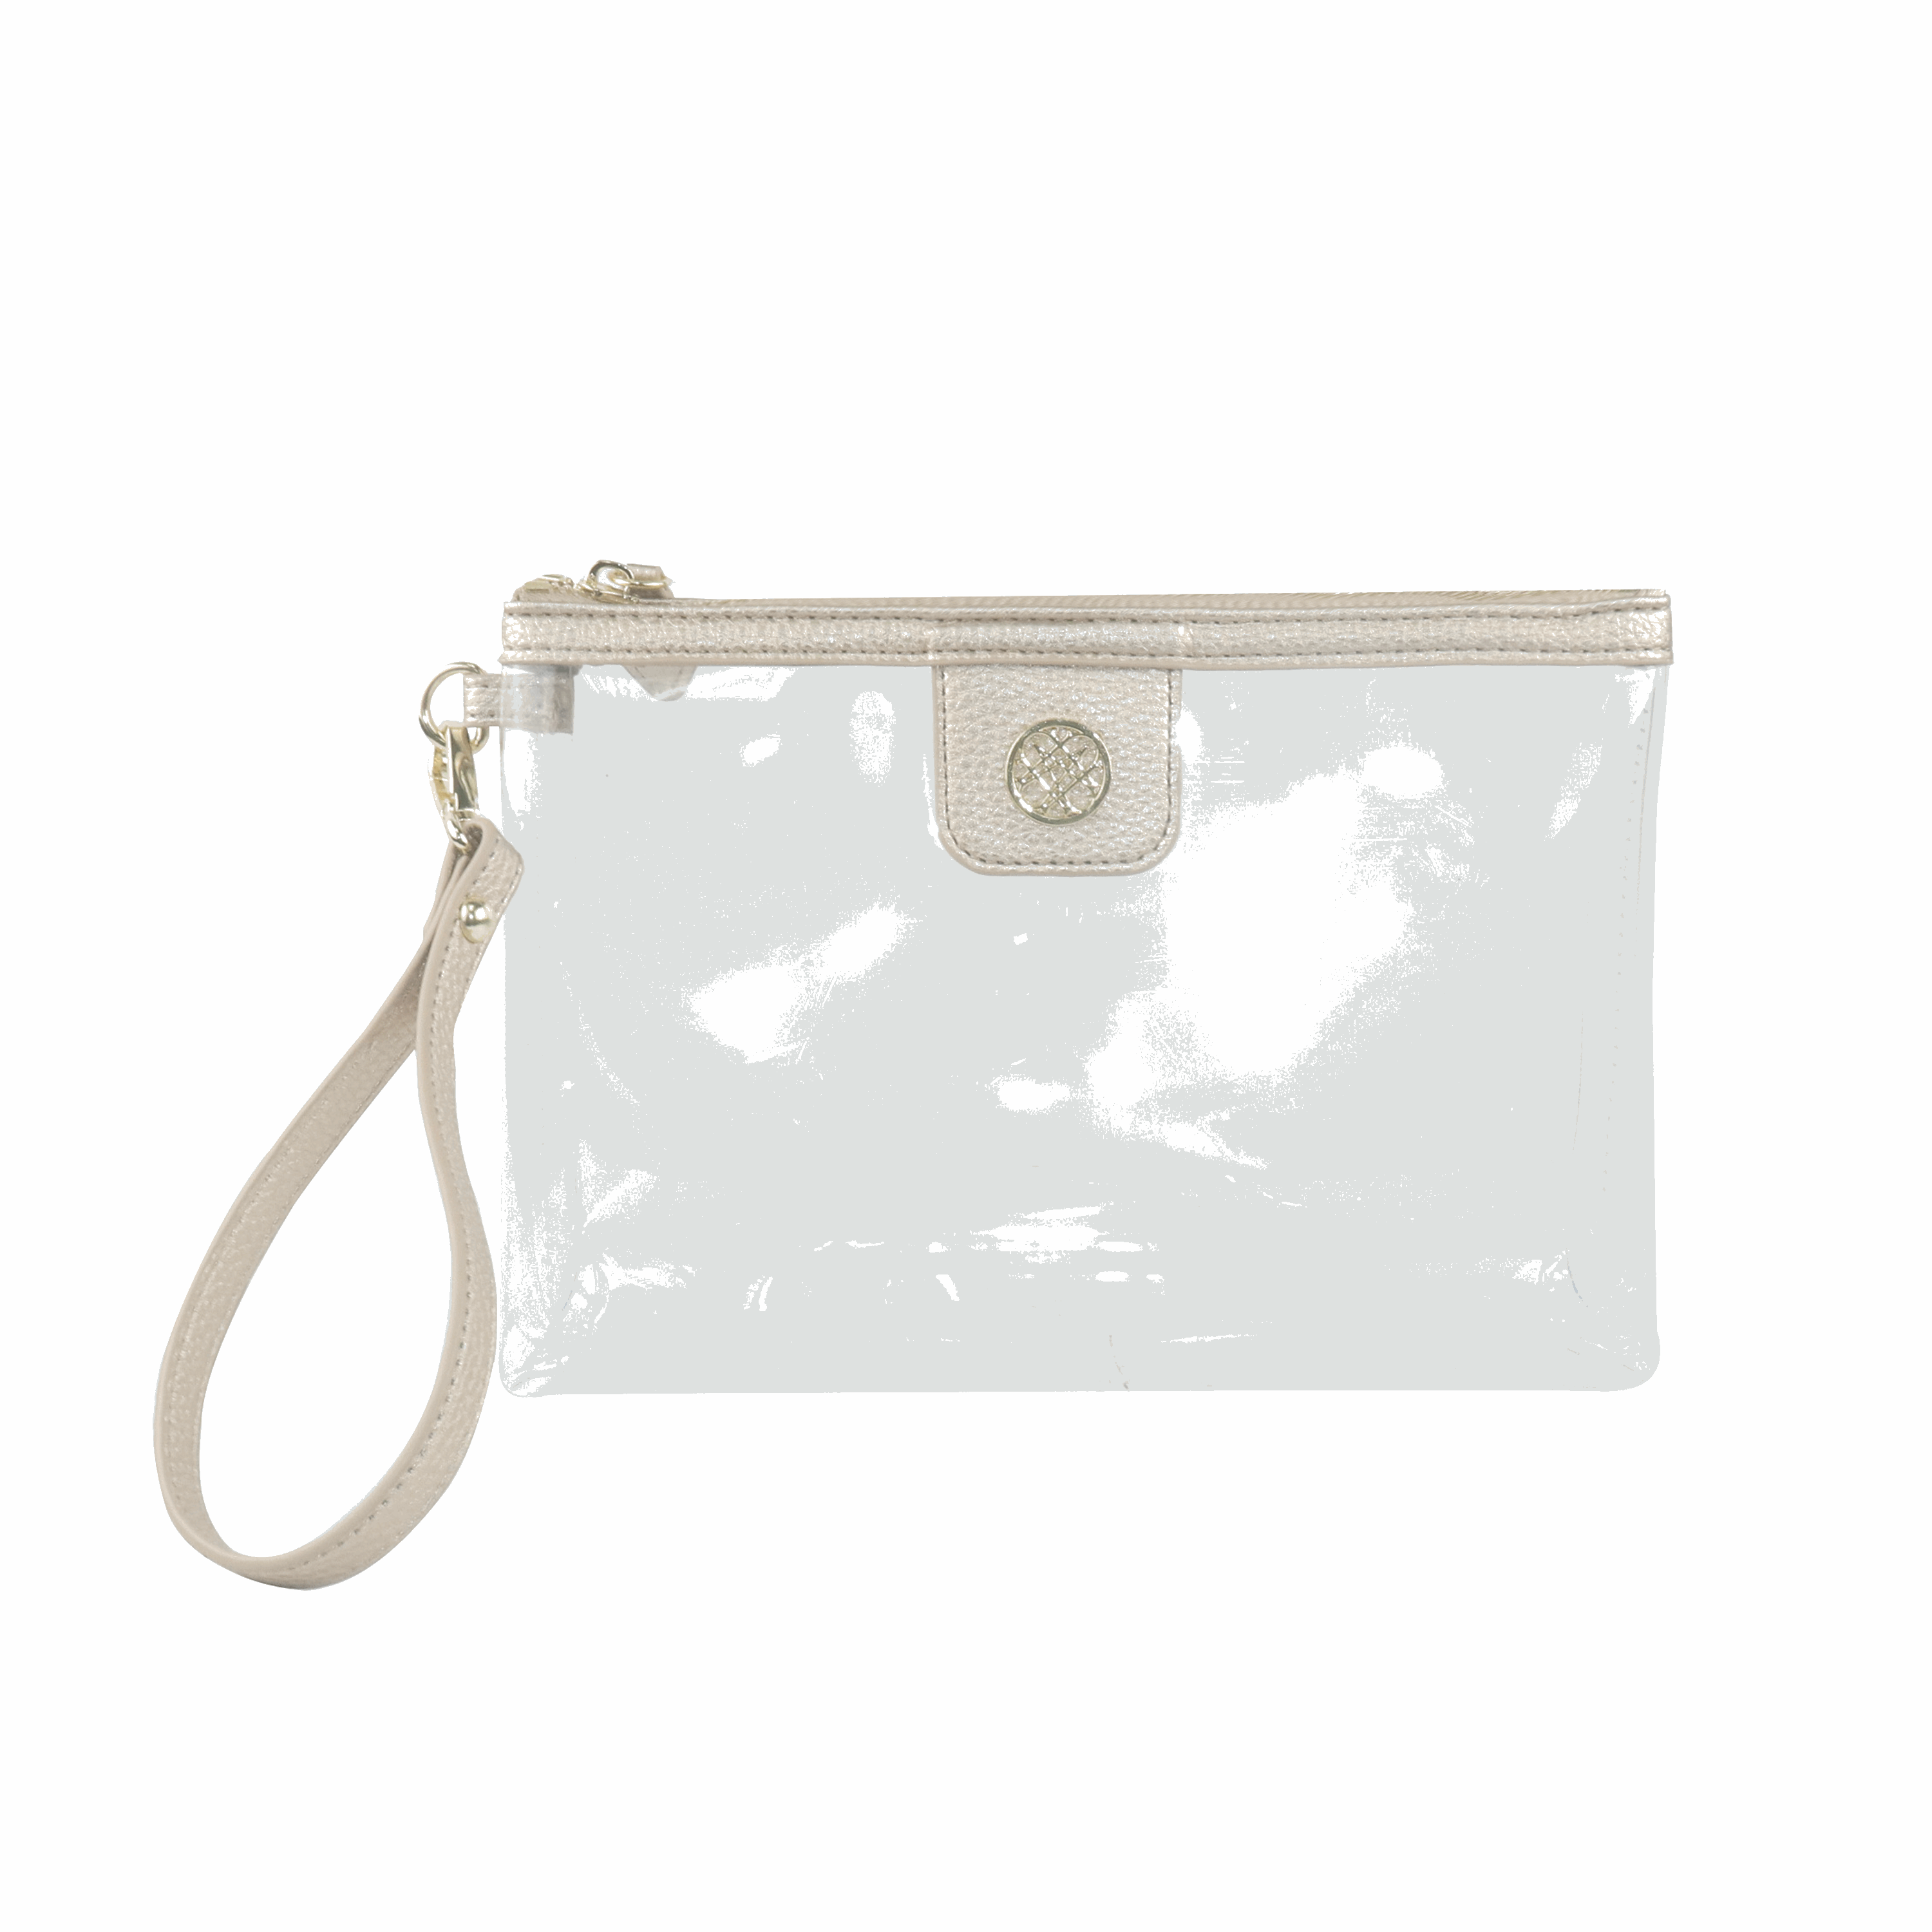 Clearly Fabulous Clear Wristlet in Gold Metallic